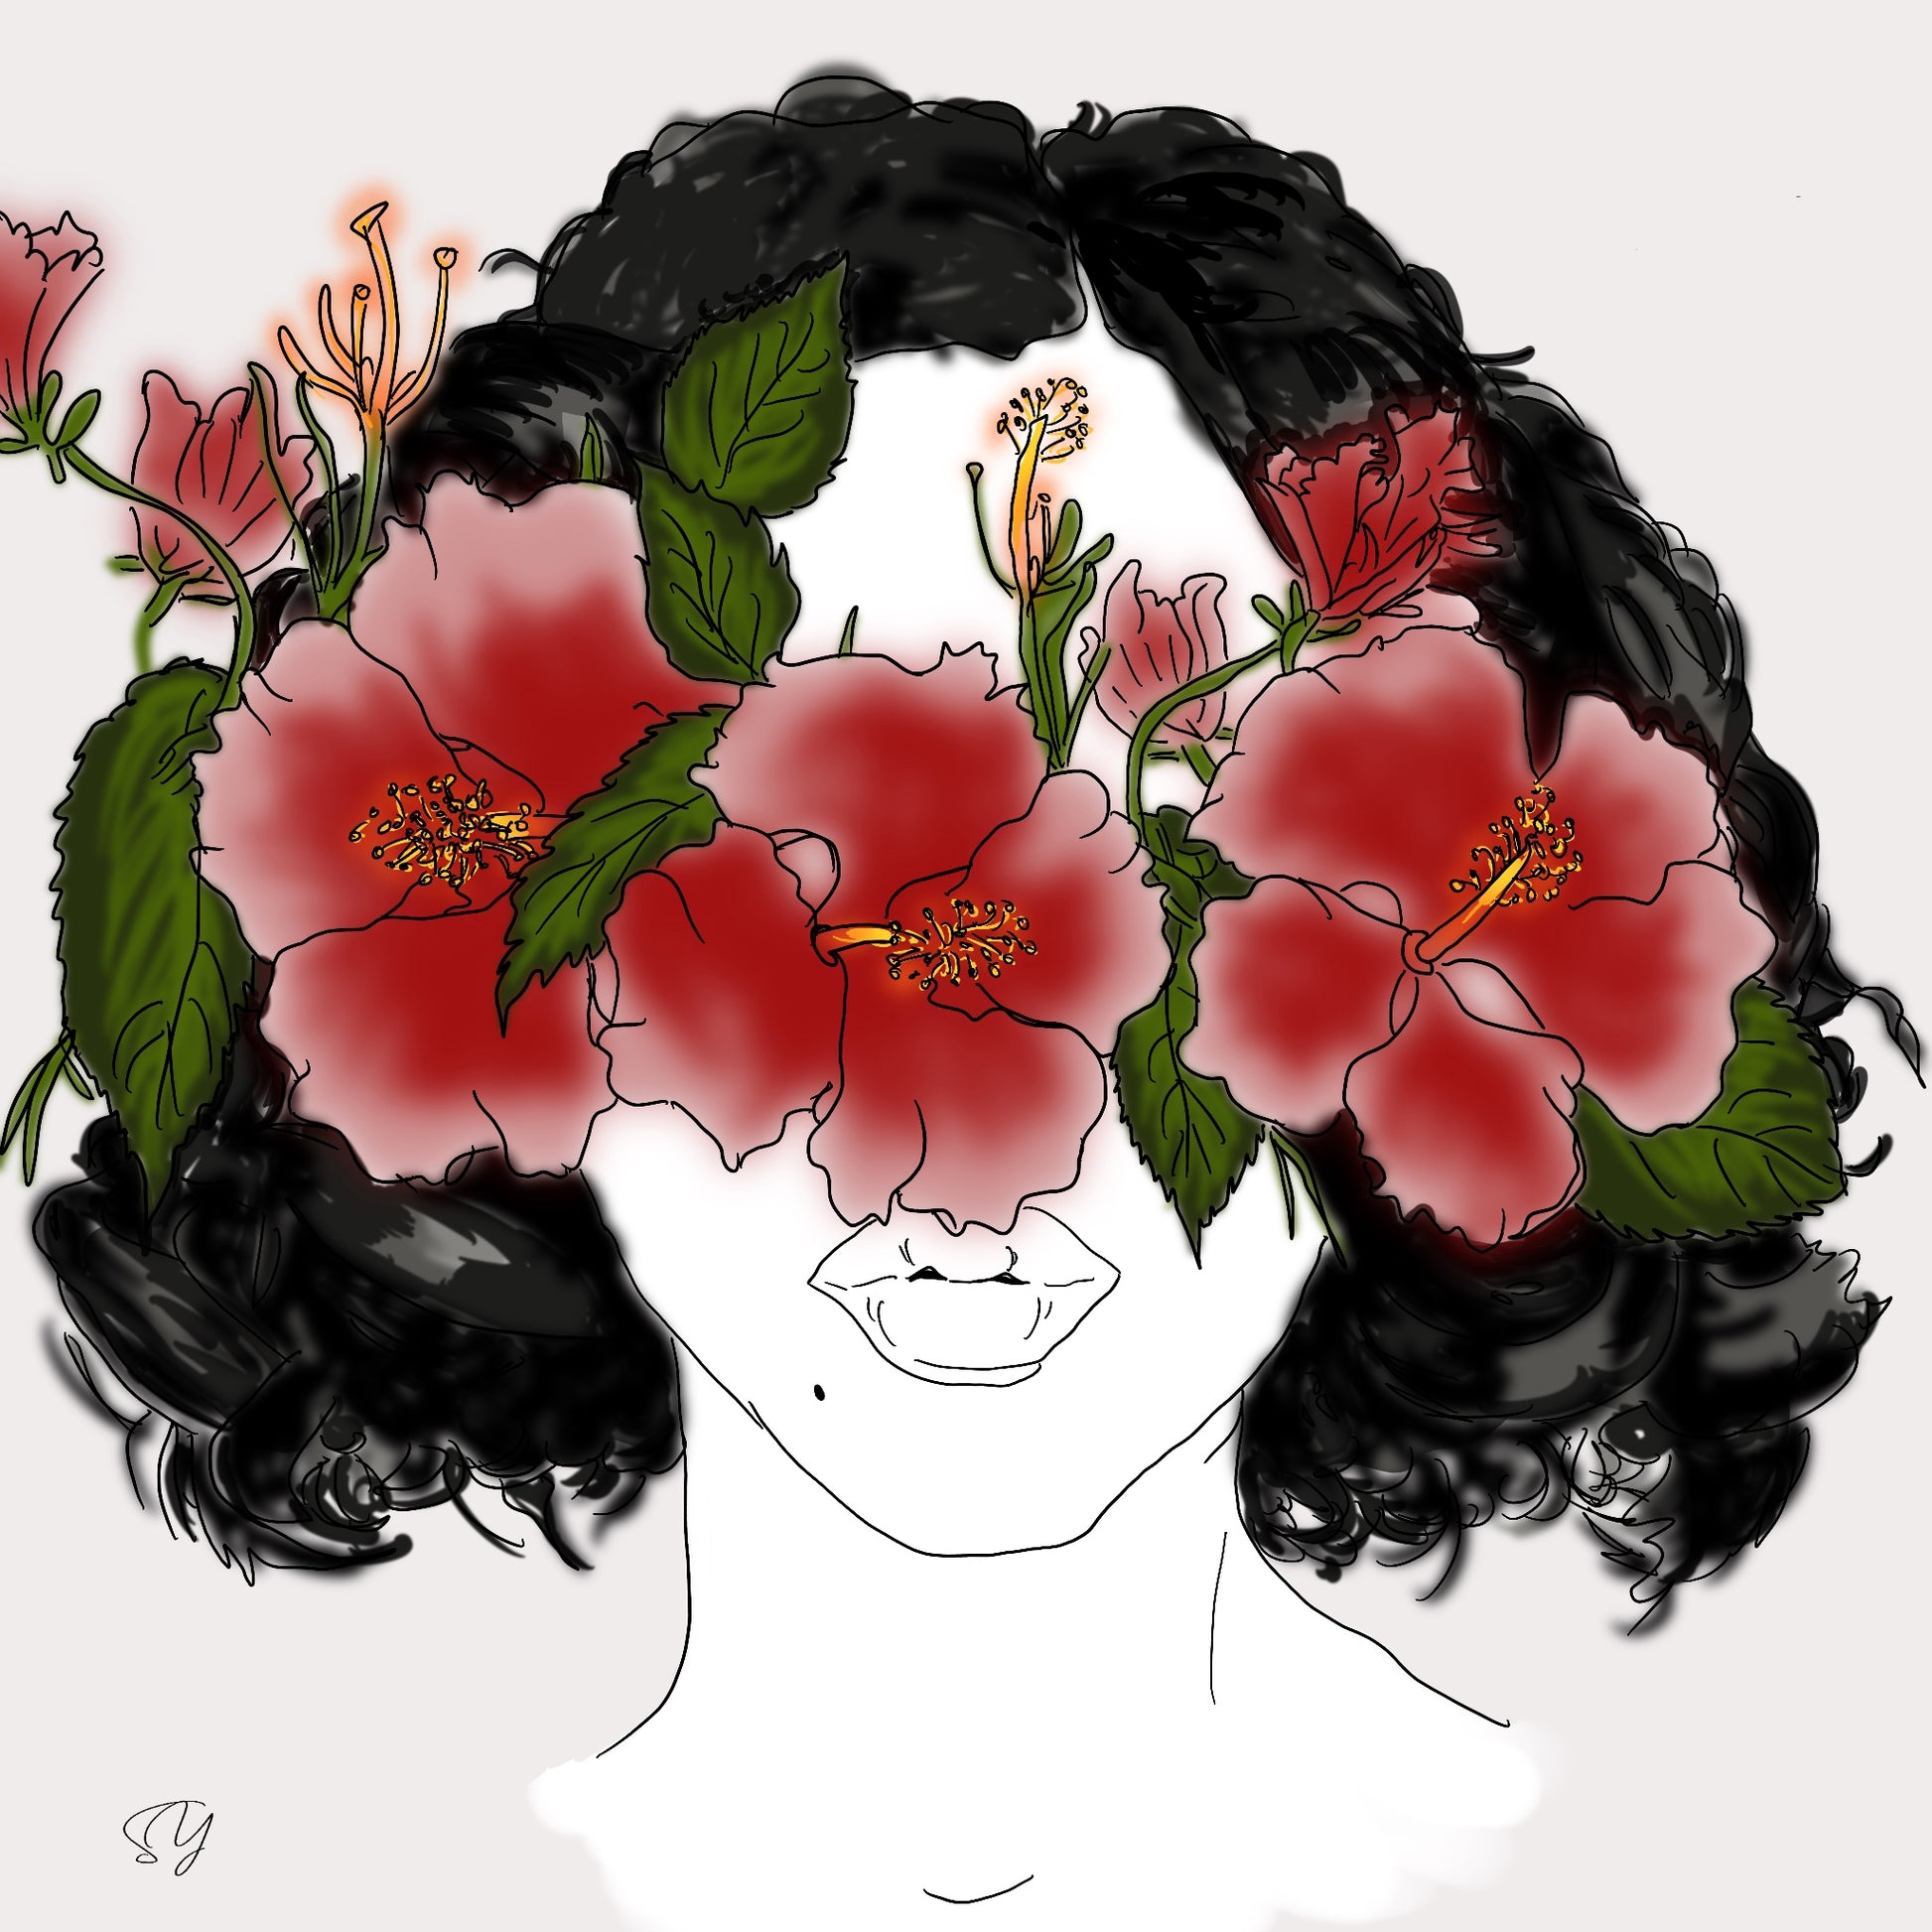 Digital art print of woman blindfolded with flowers